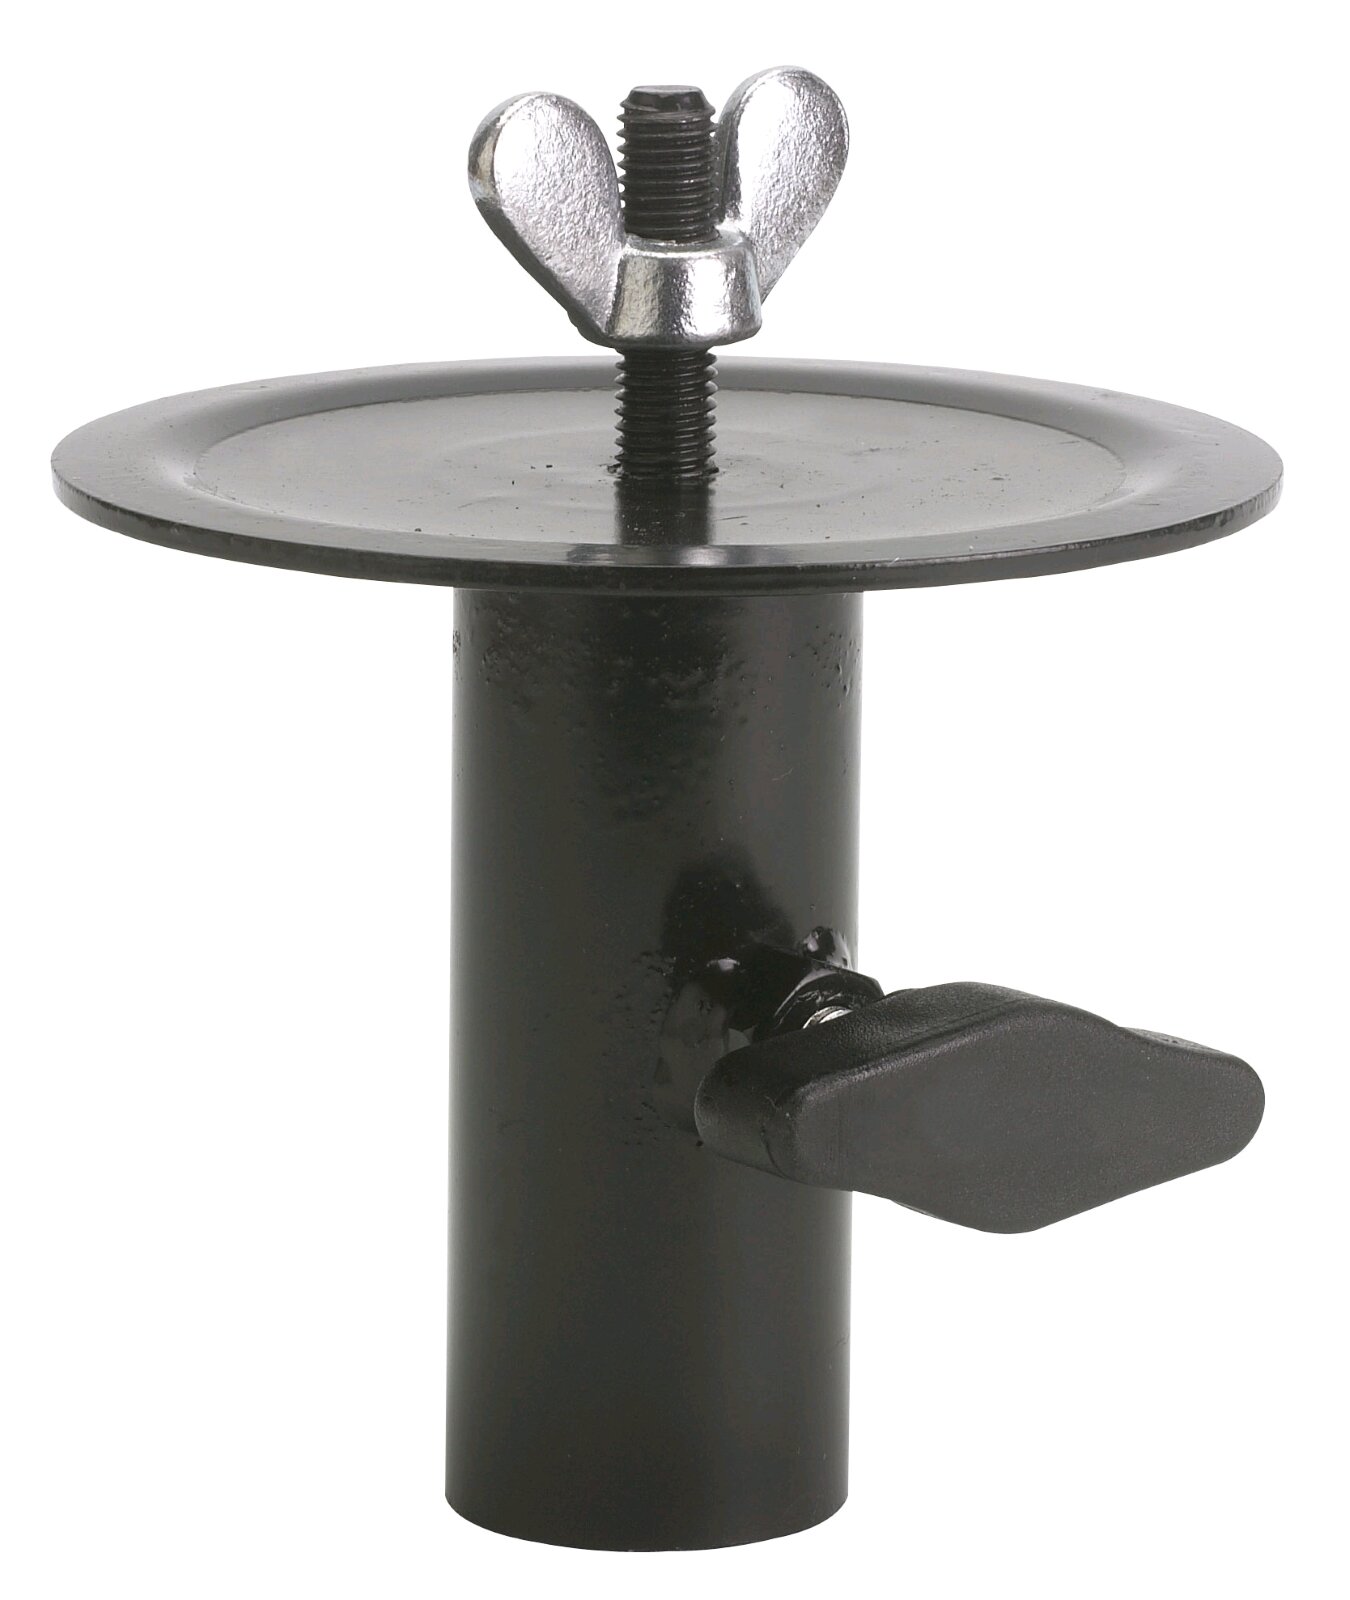 Contest CPL-12 Reinforced cup for stand or riser : photo 1